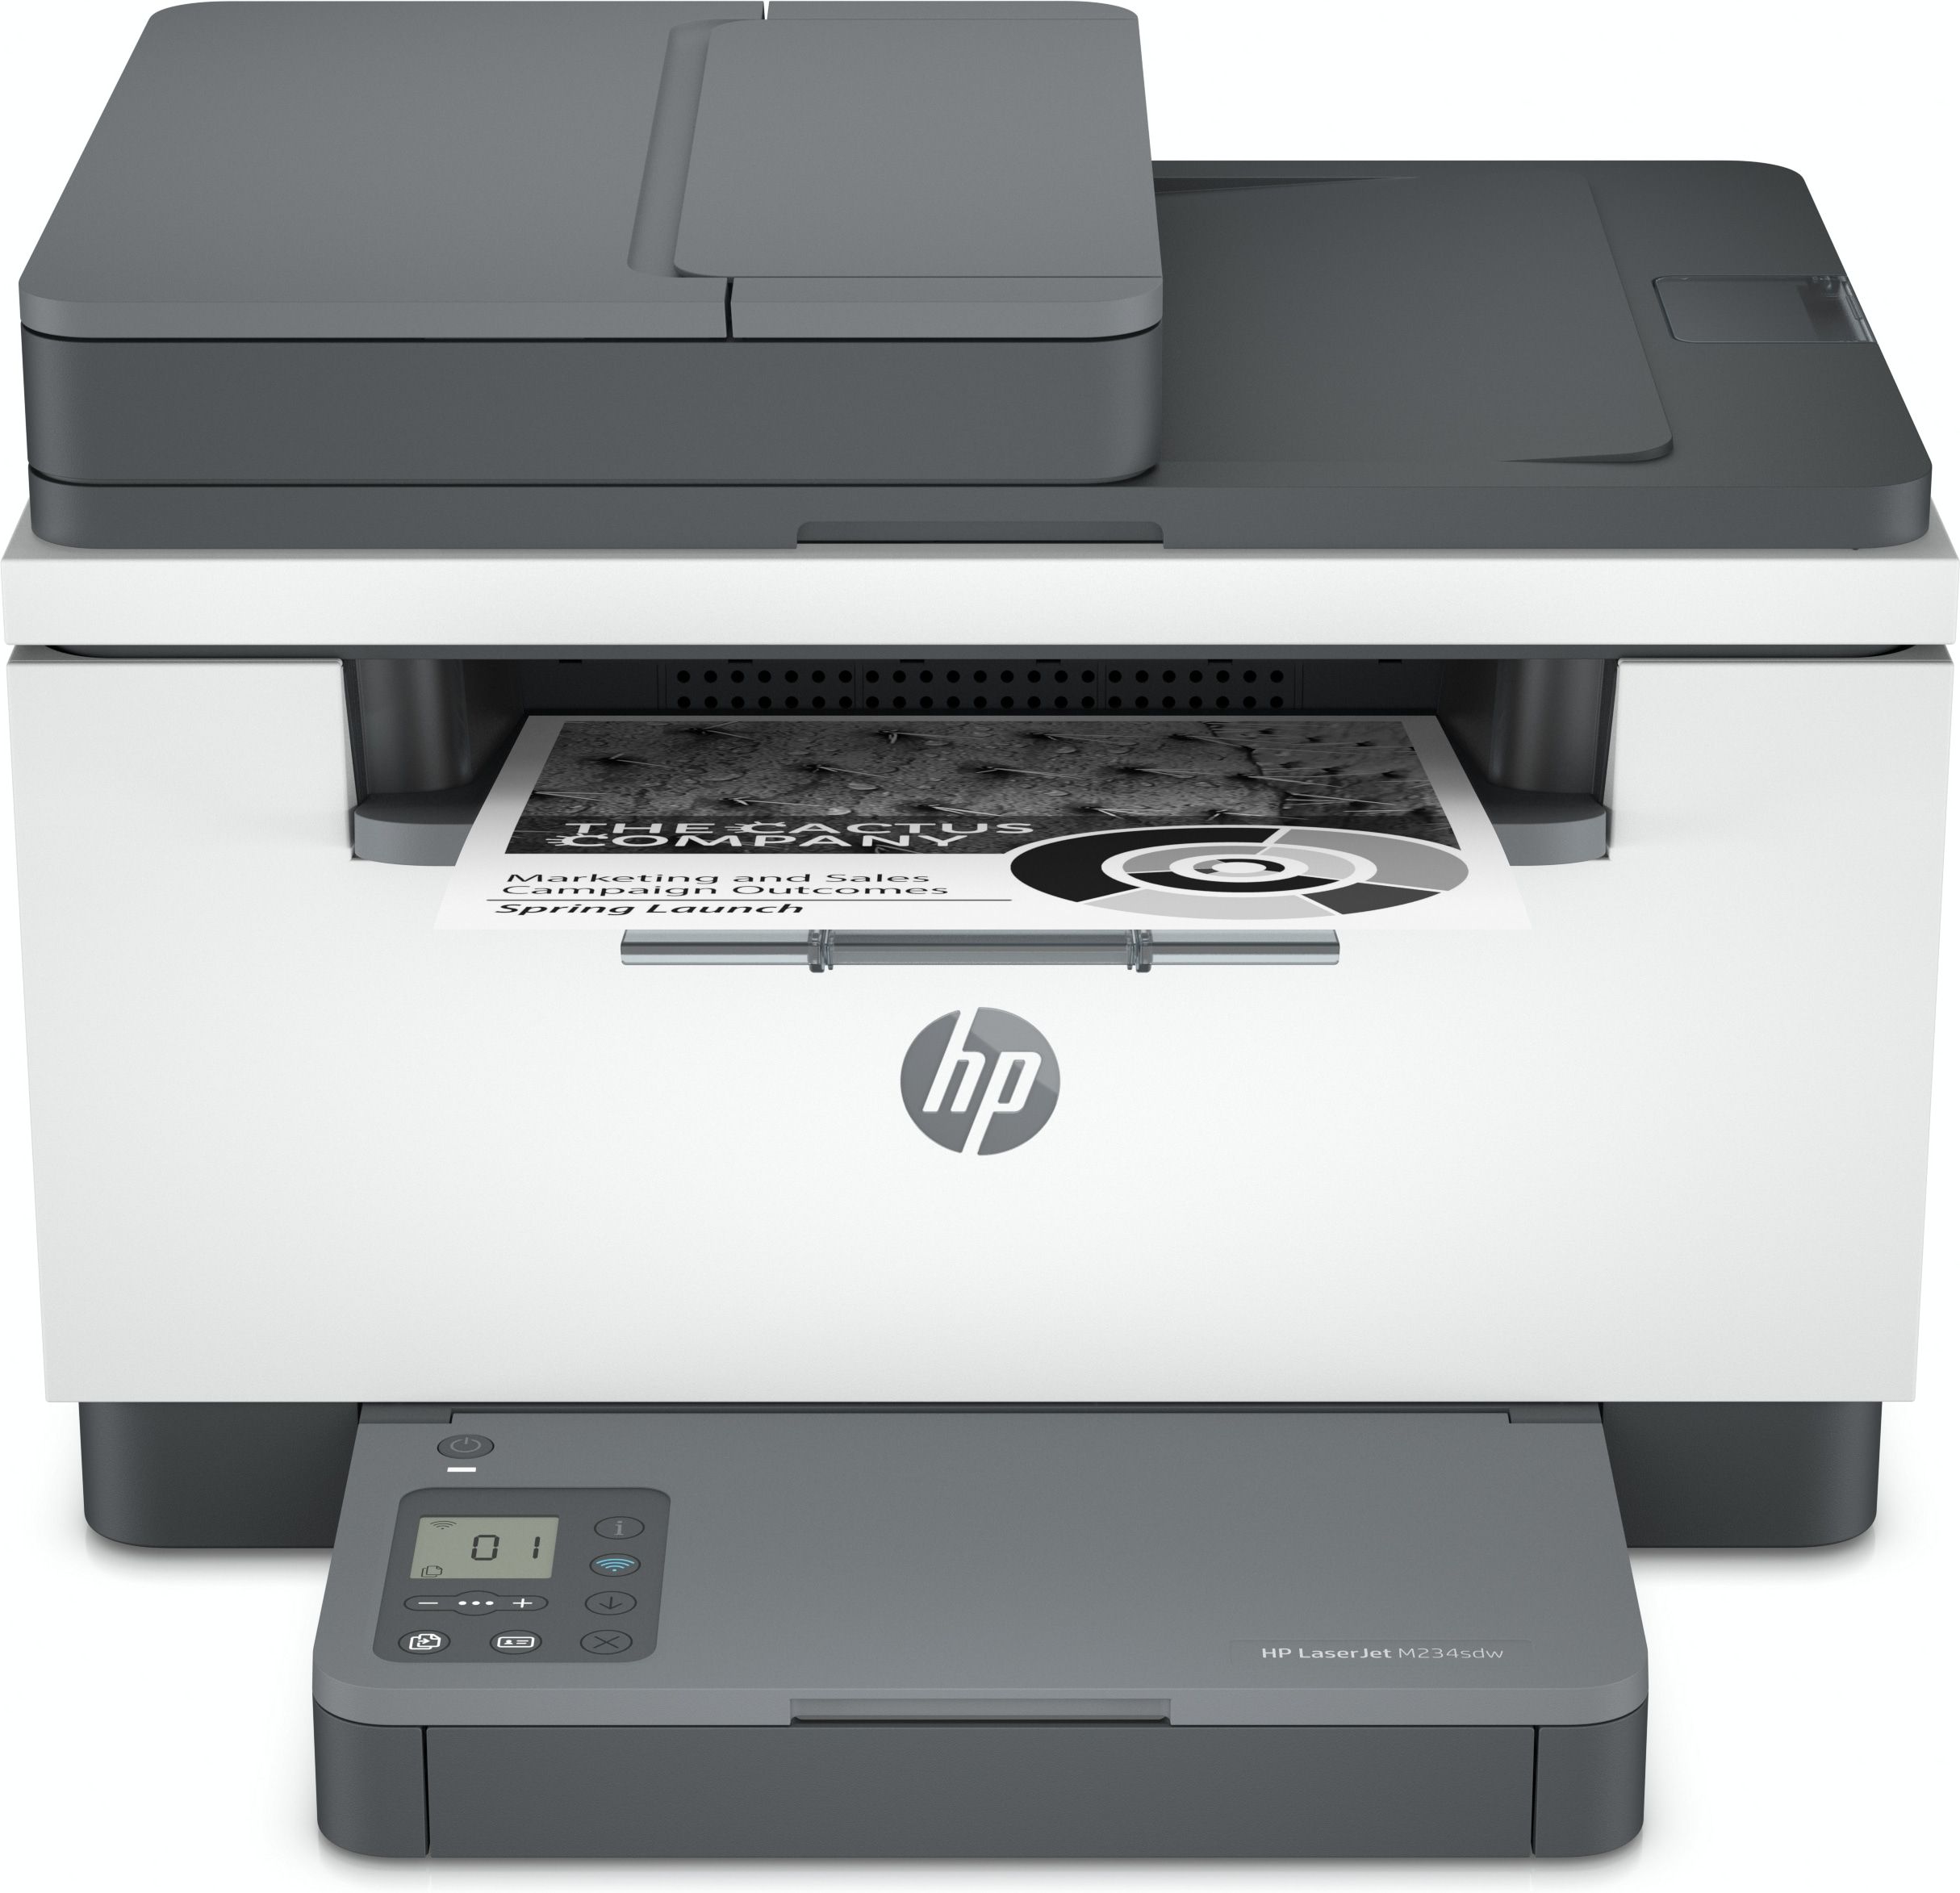 HP LaserJet MFP M234sdw Printer, Black and white, Printer for Small office, Print, copy, scan, Two-sided printing; Scan to email; Scan to PDF_2